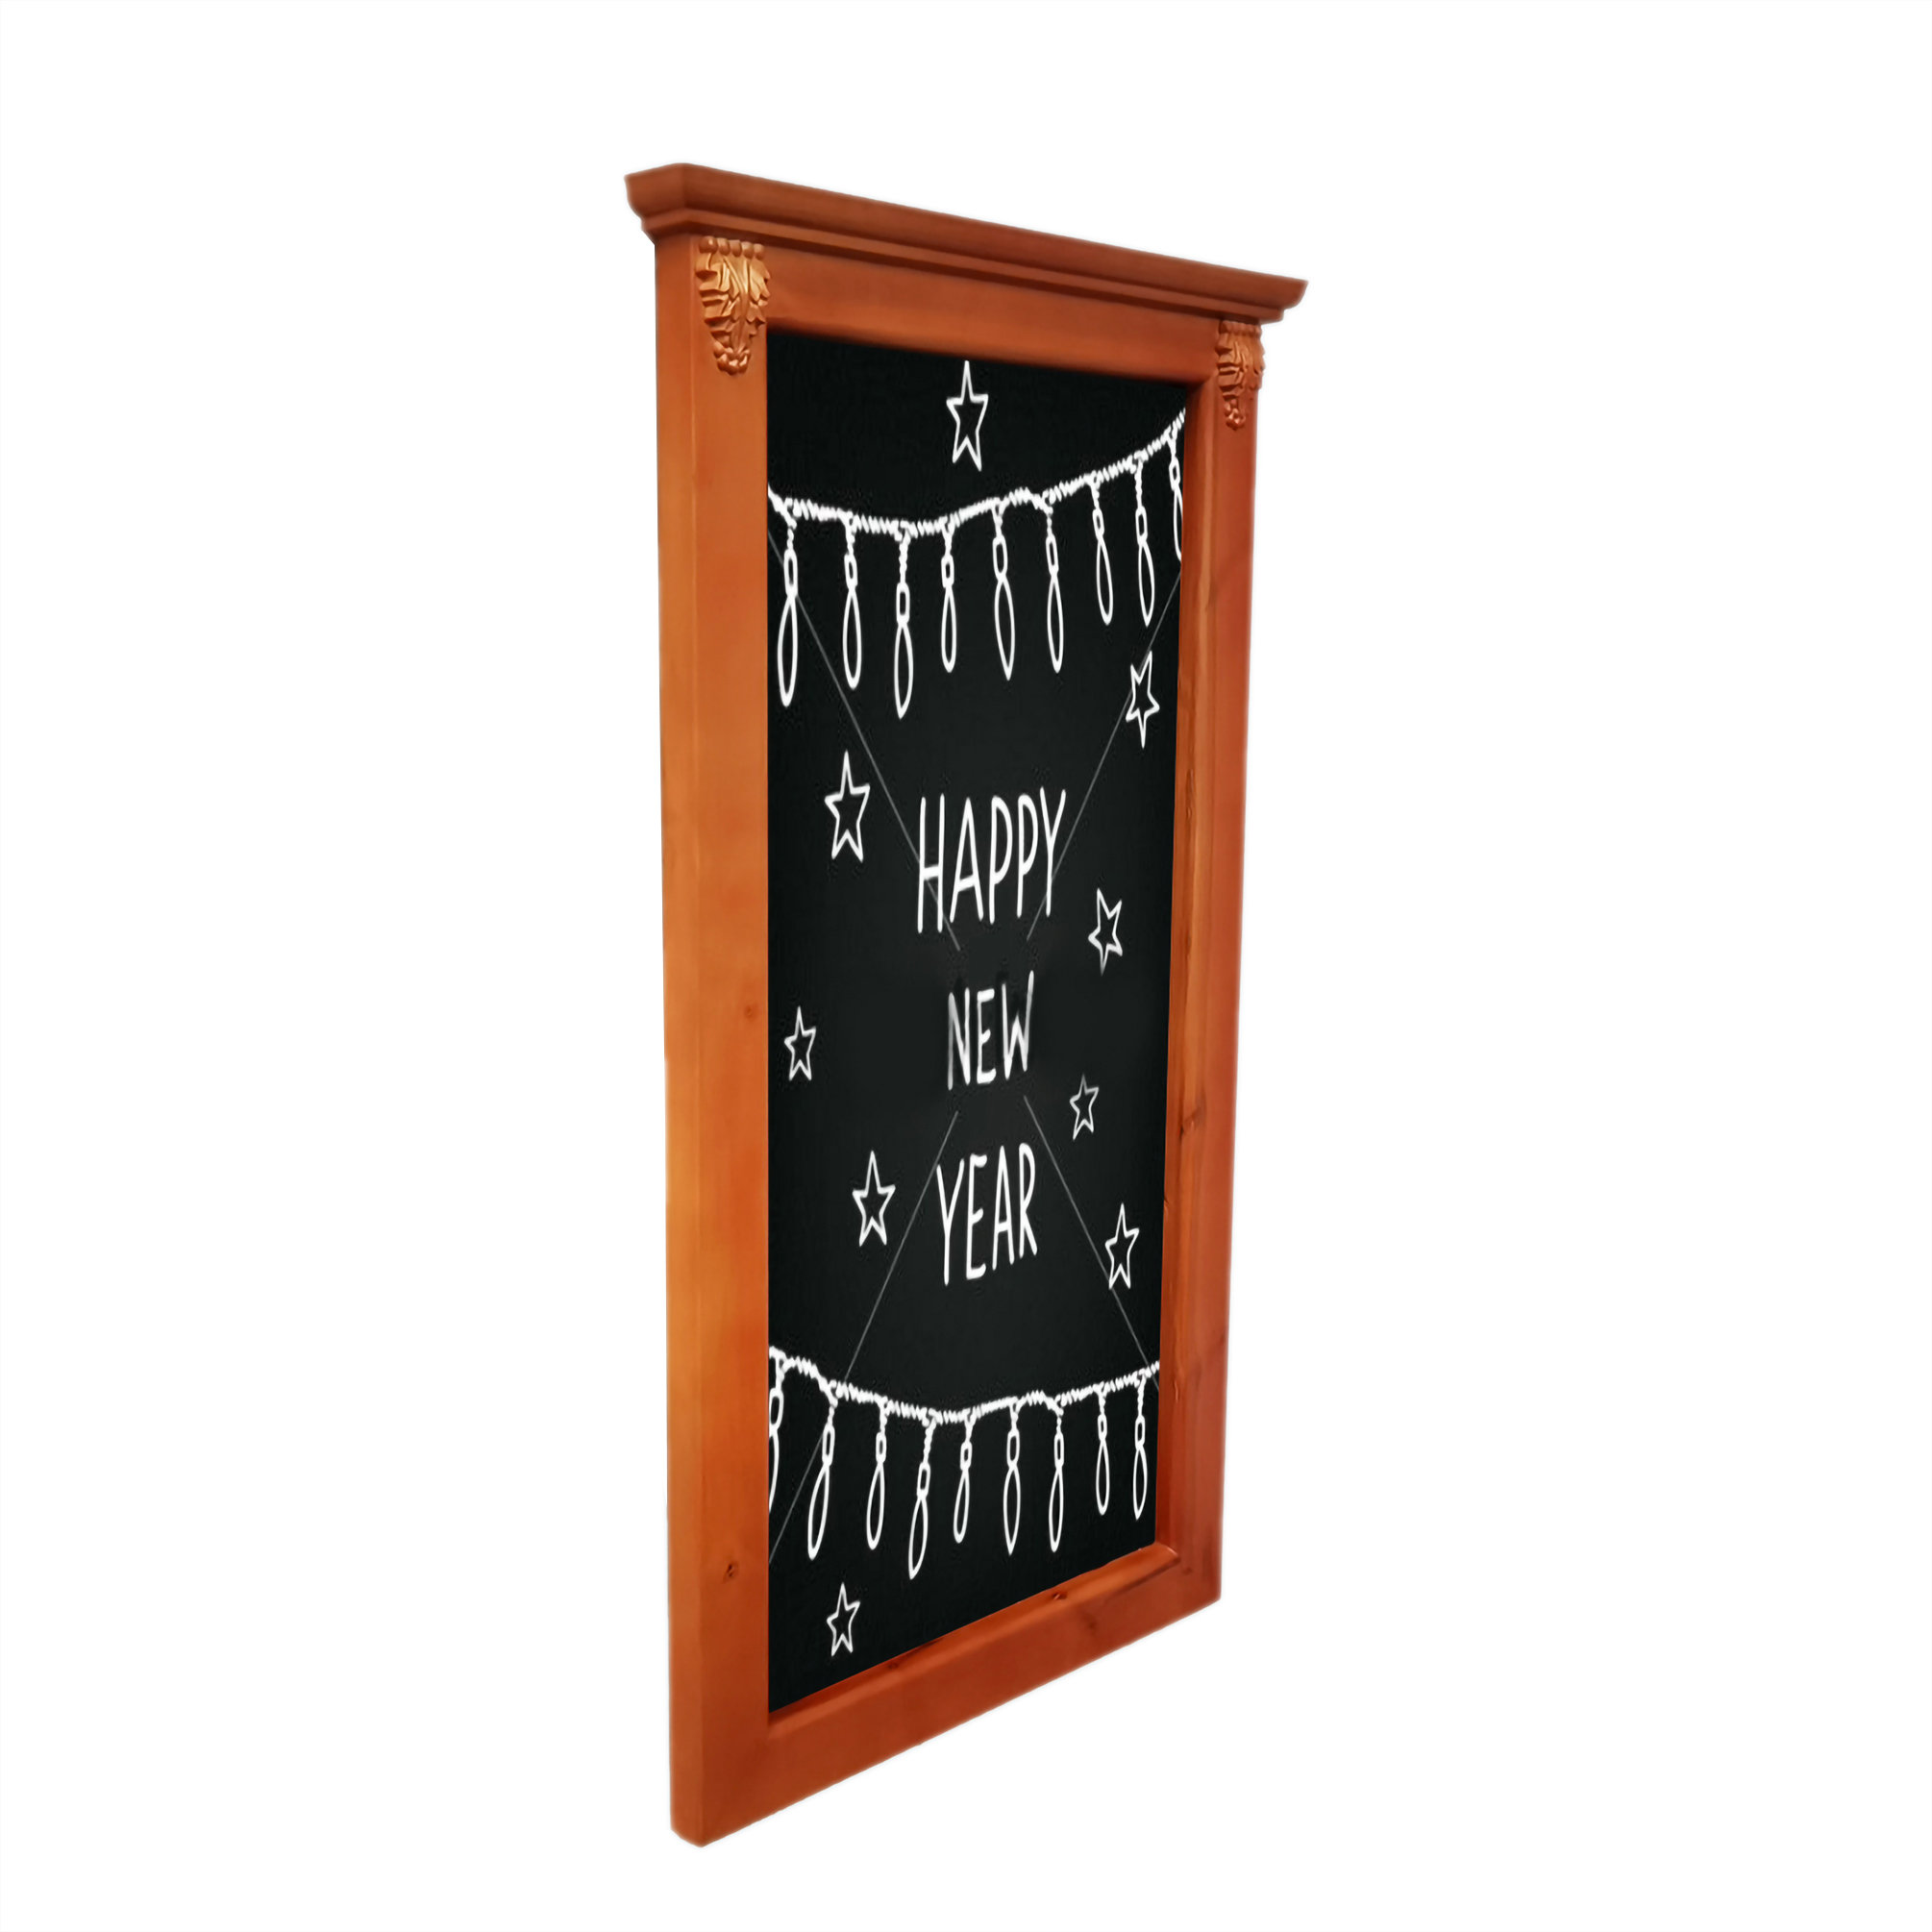 6 Sizes/4 Colors - Small Chalkboard Sign Menu Board for Kitchen